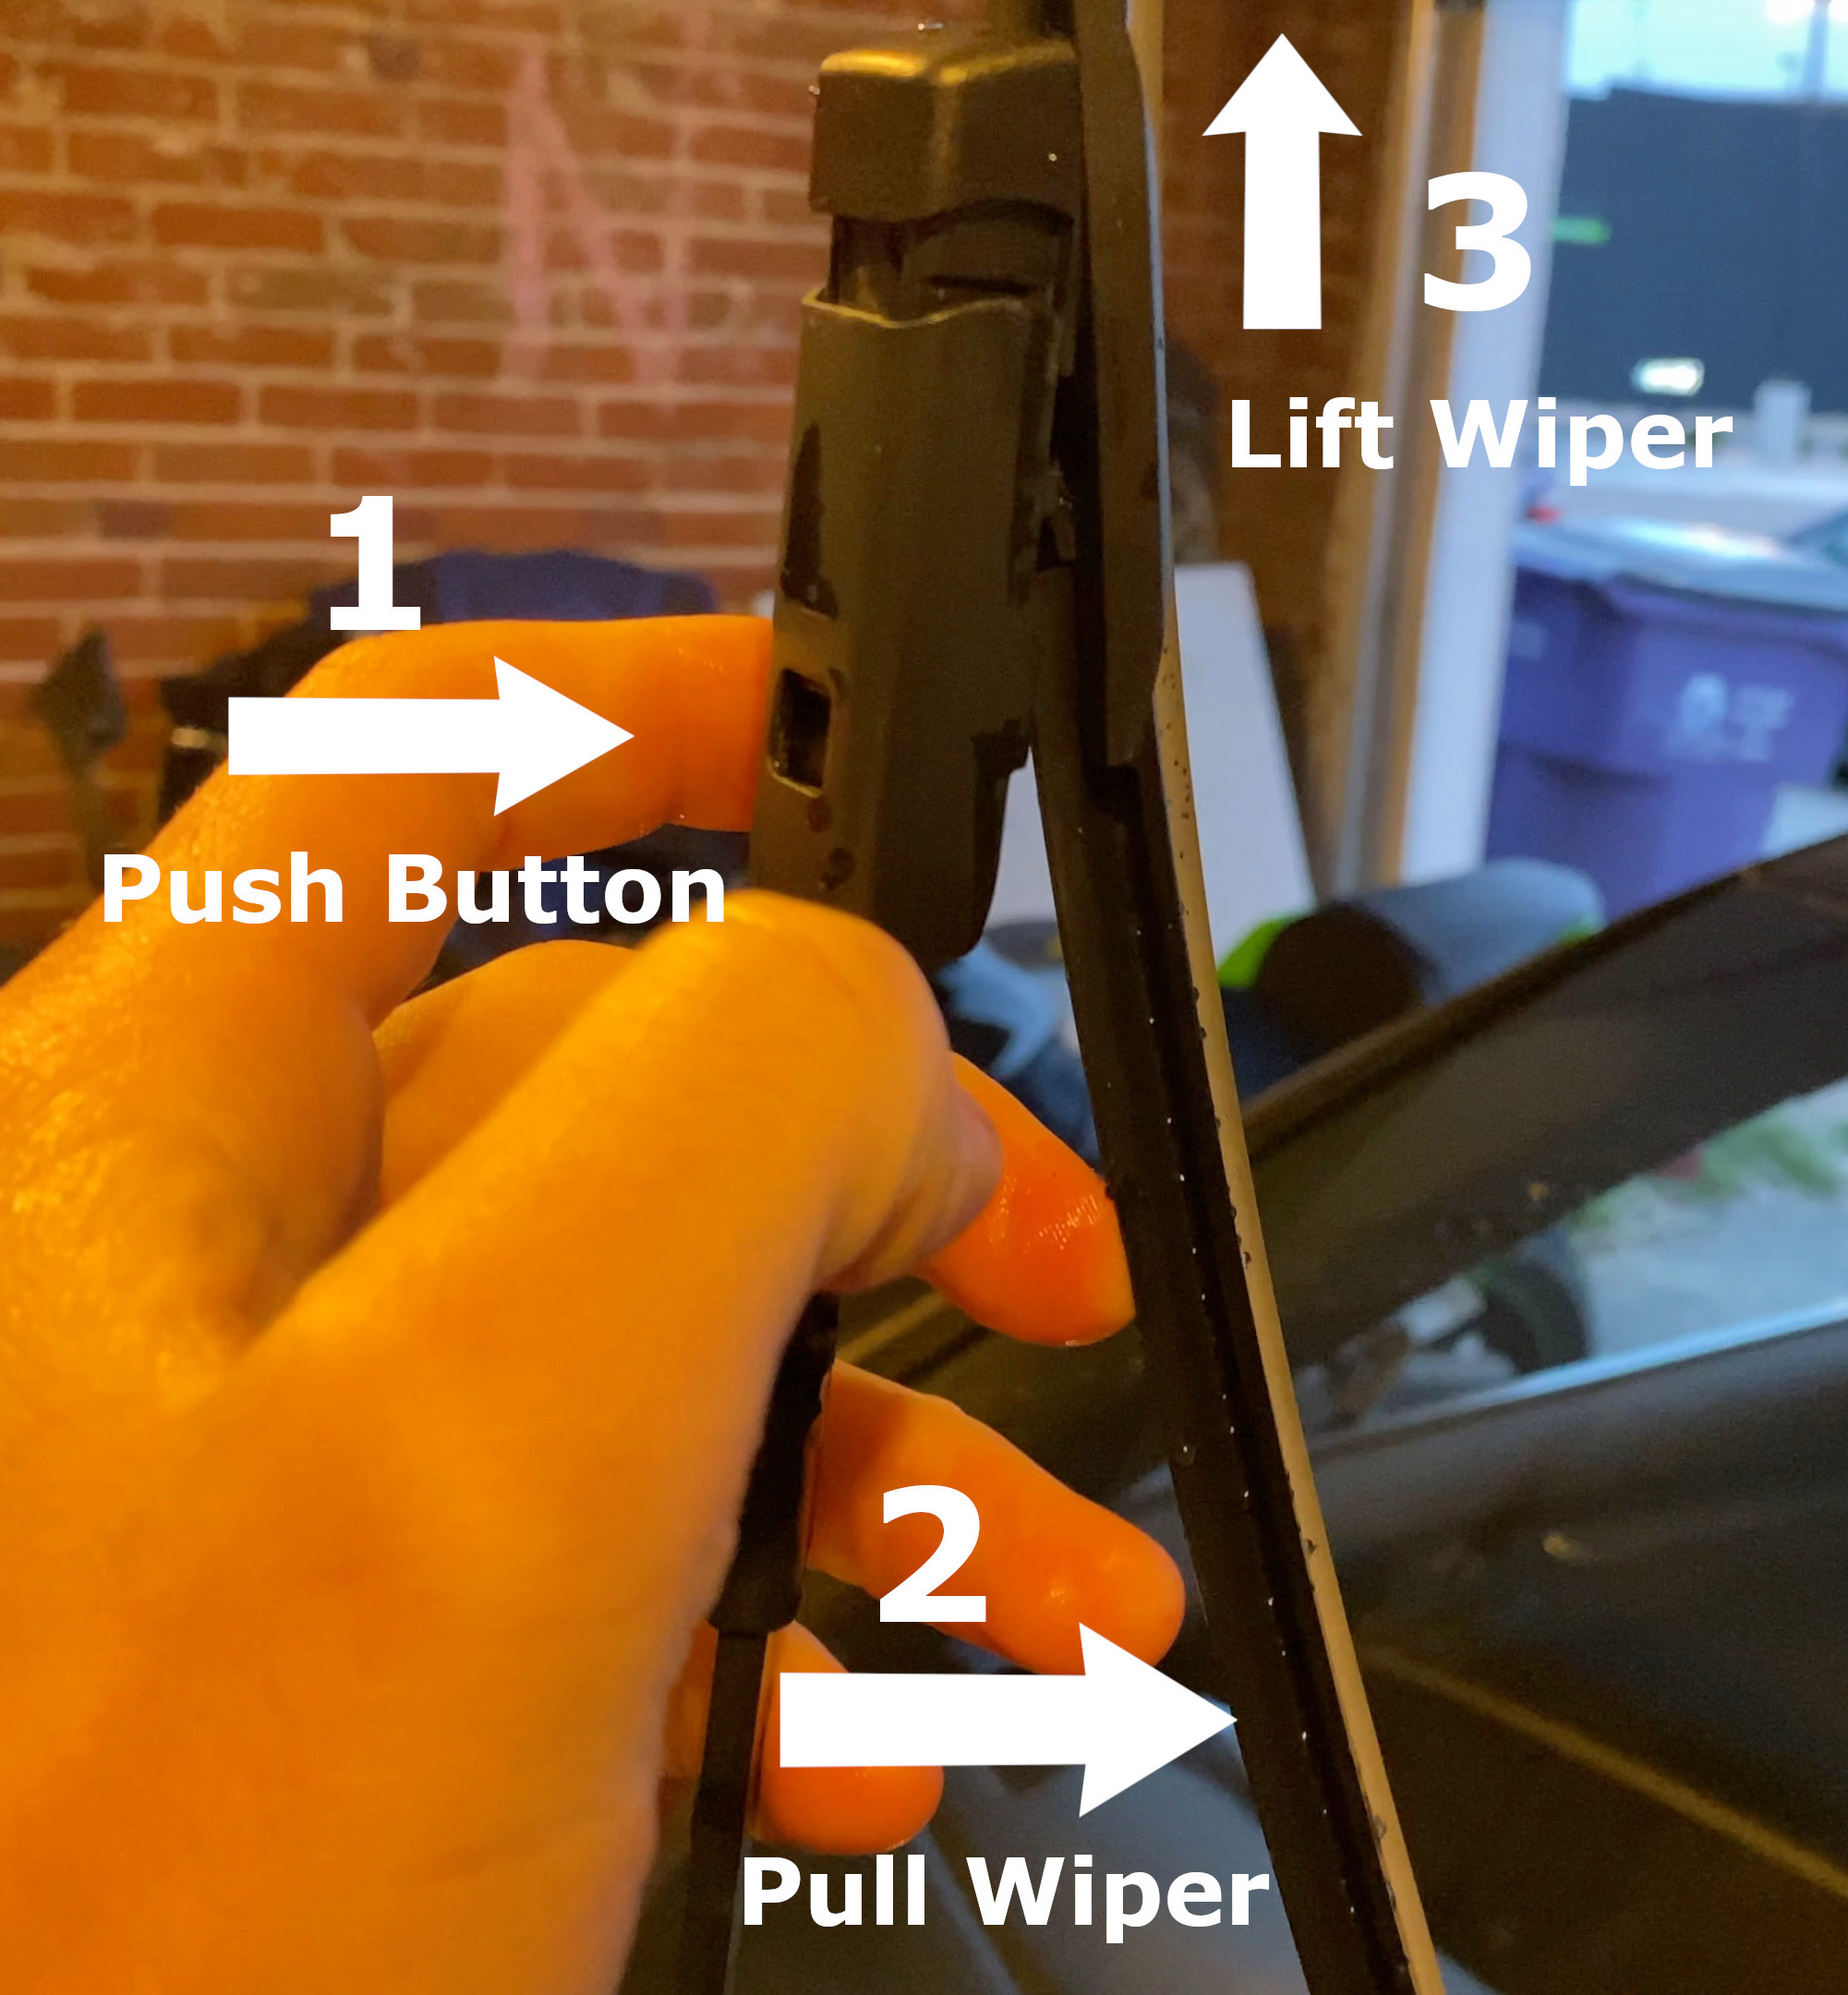 Screenshot of how to remove windshield wipers: push button, pull wiper away from harness, pull wiper out of harness